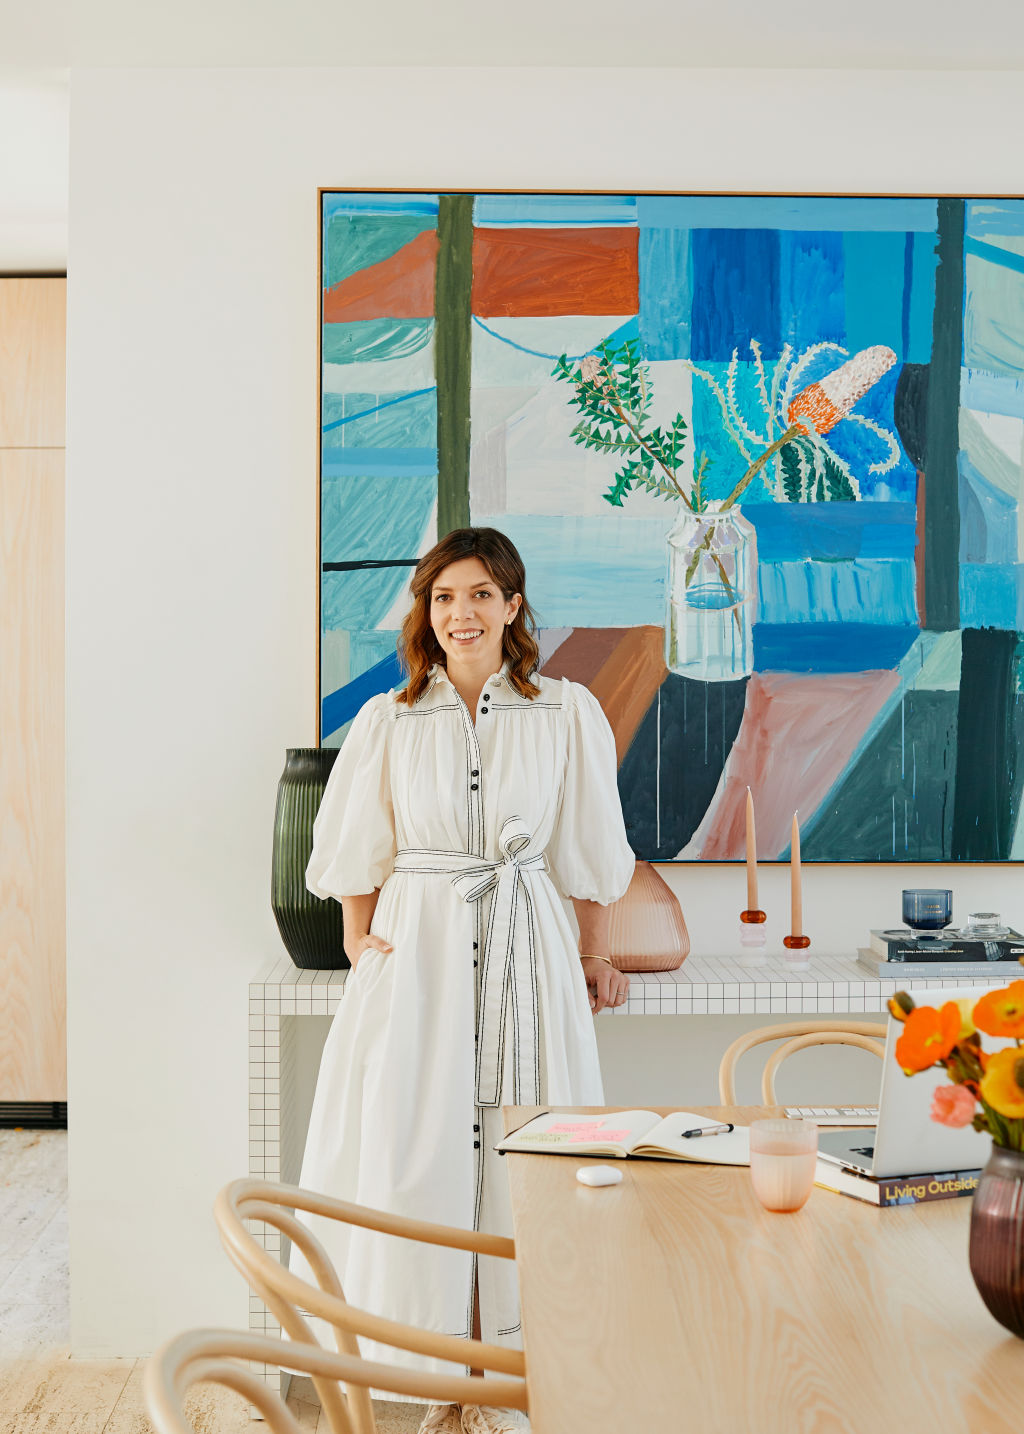 Lucy Feagins recommends thinking outside the square when it comes to artwork in your home. Photo: Amelia Stanwix Photography